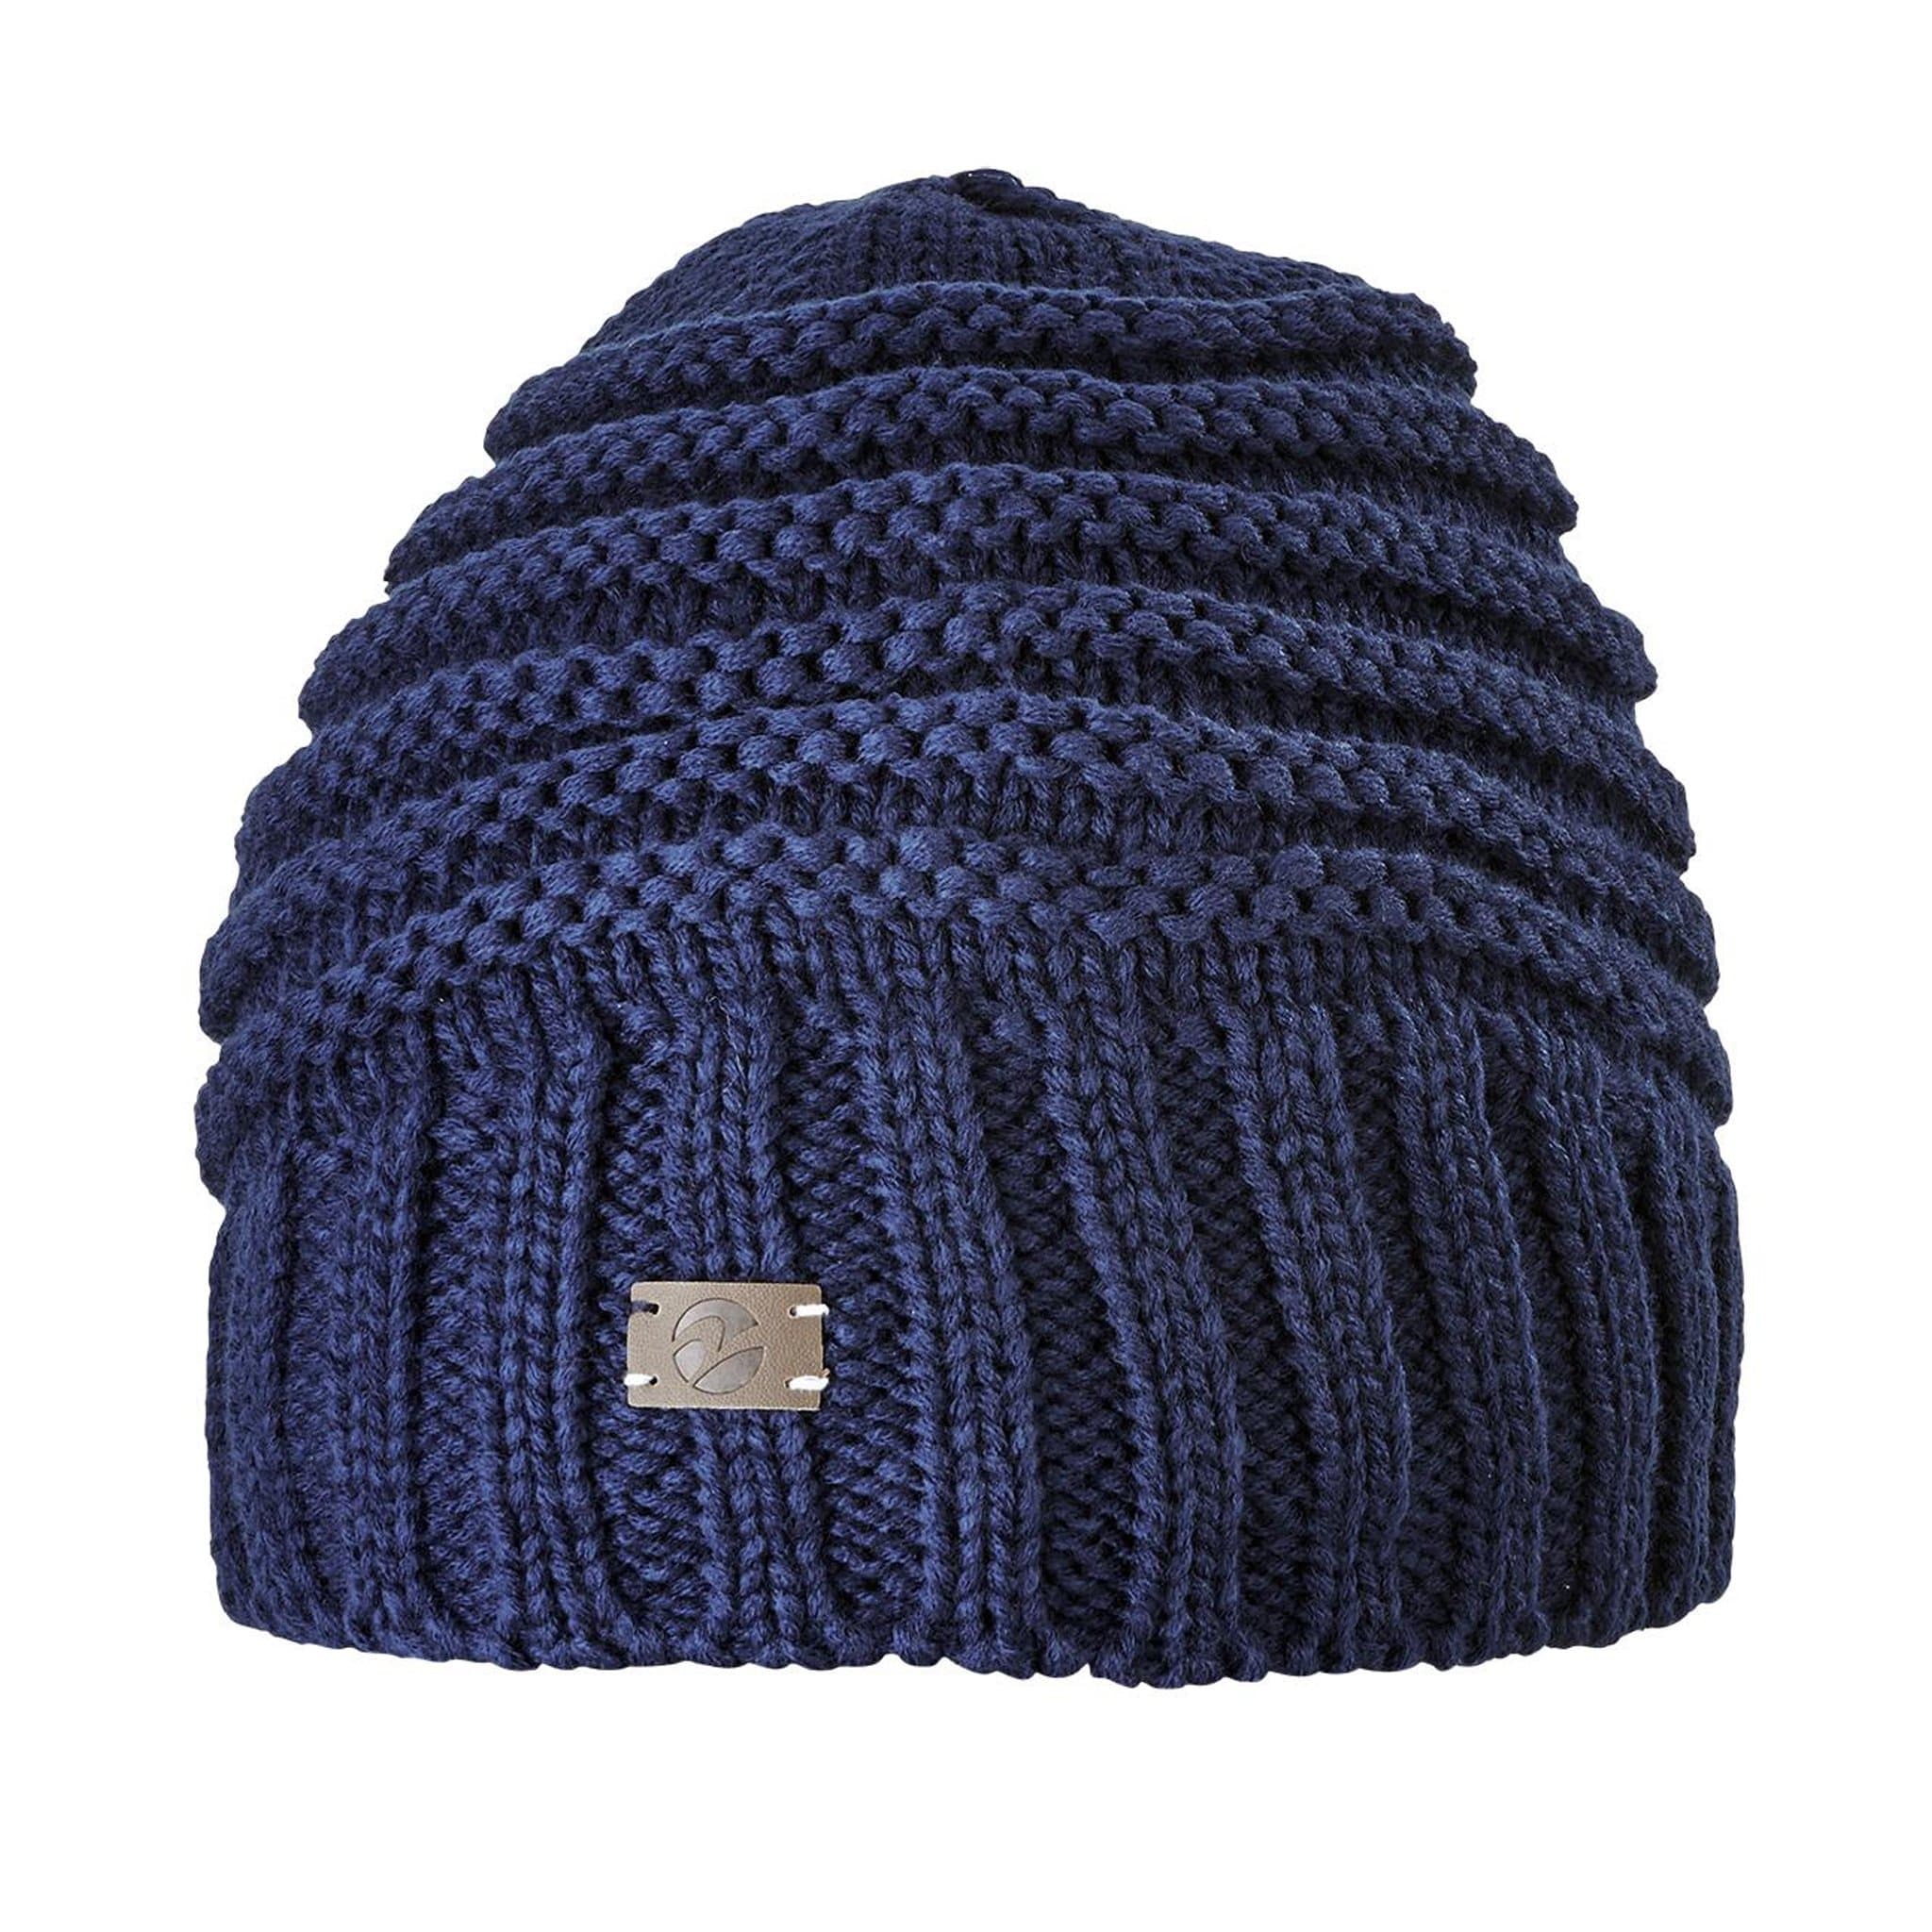 Busse Knitted Beanie Hat Navy 719339.